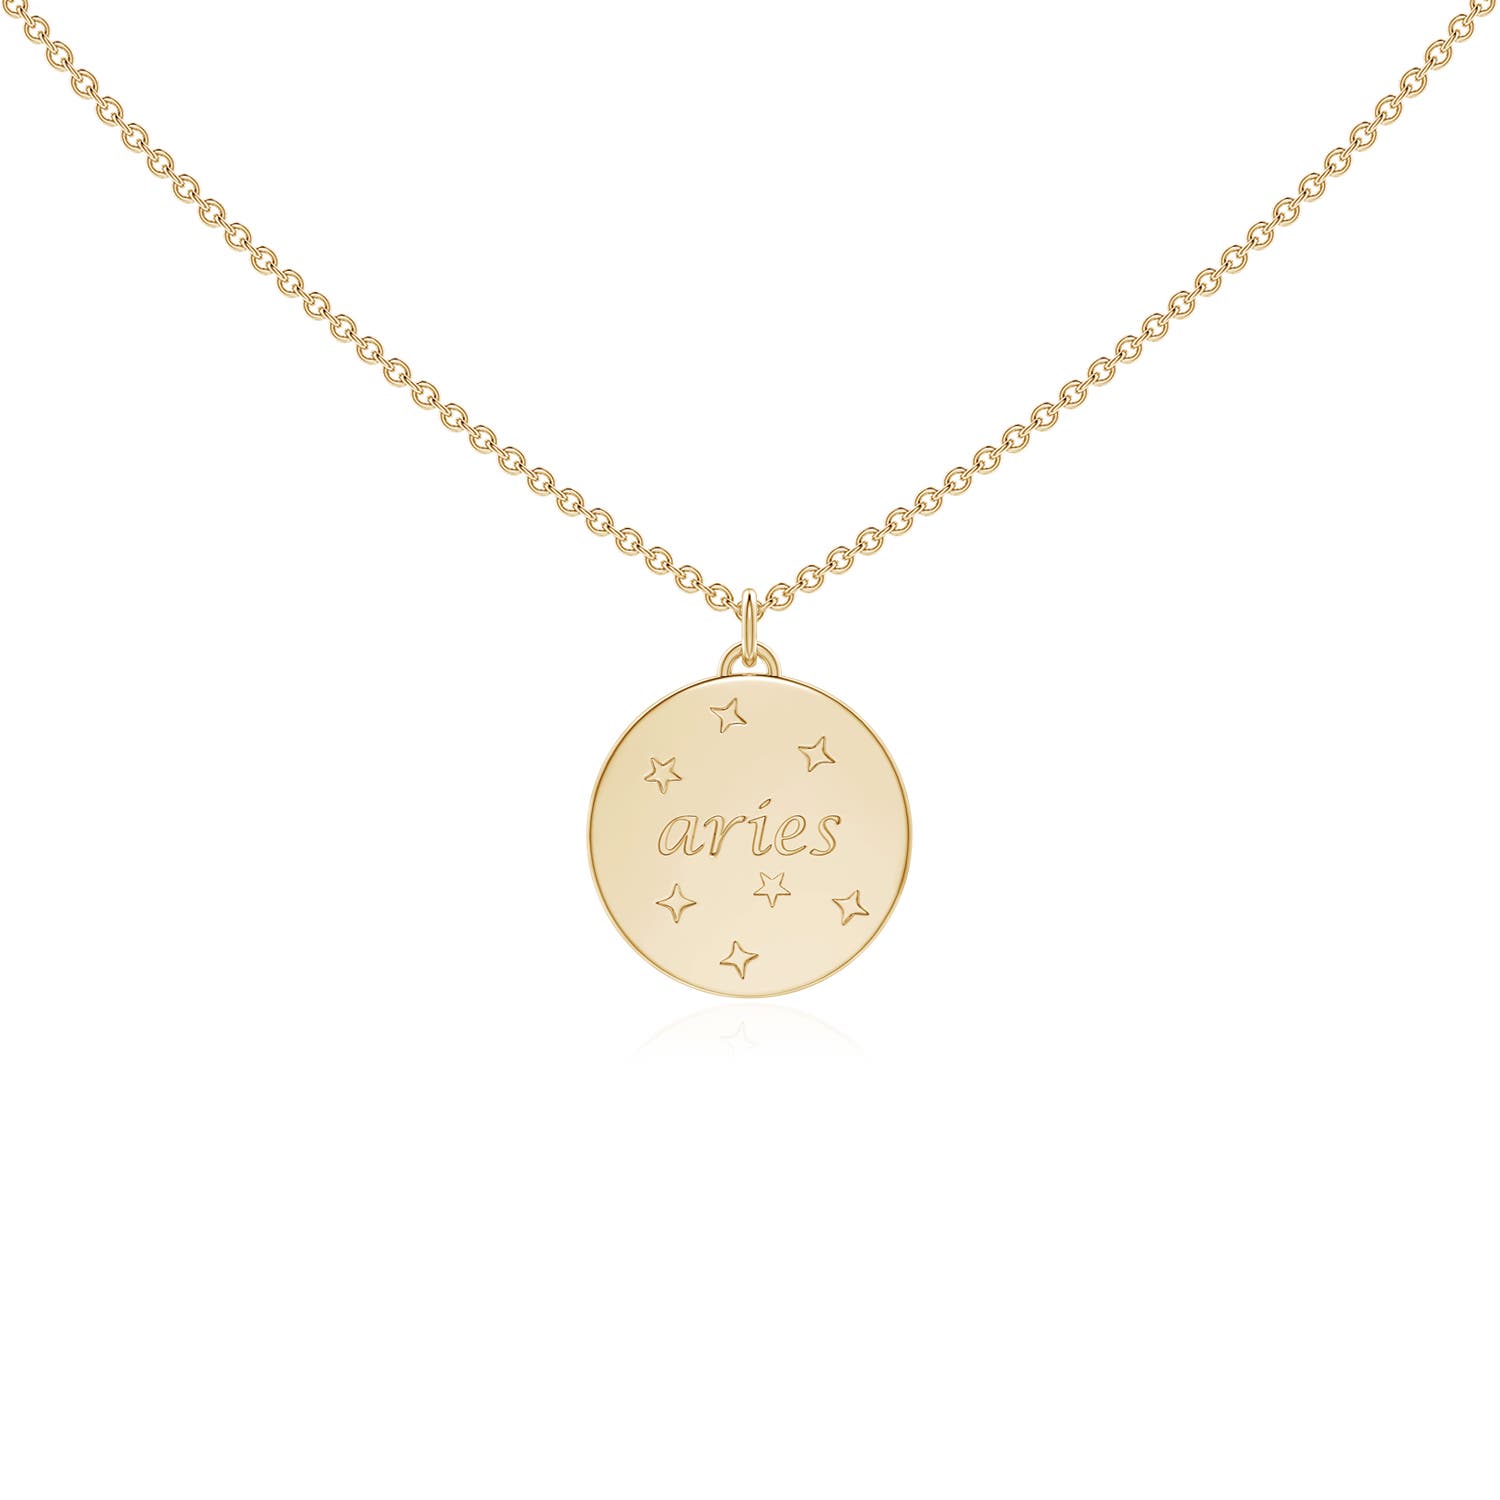 H, SI2 / 0.26 CT / 14 KT Yellow Gold